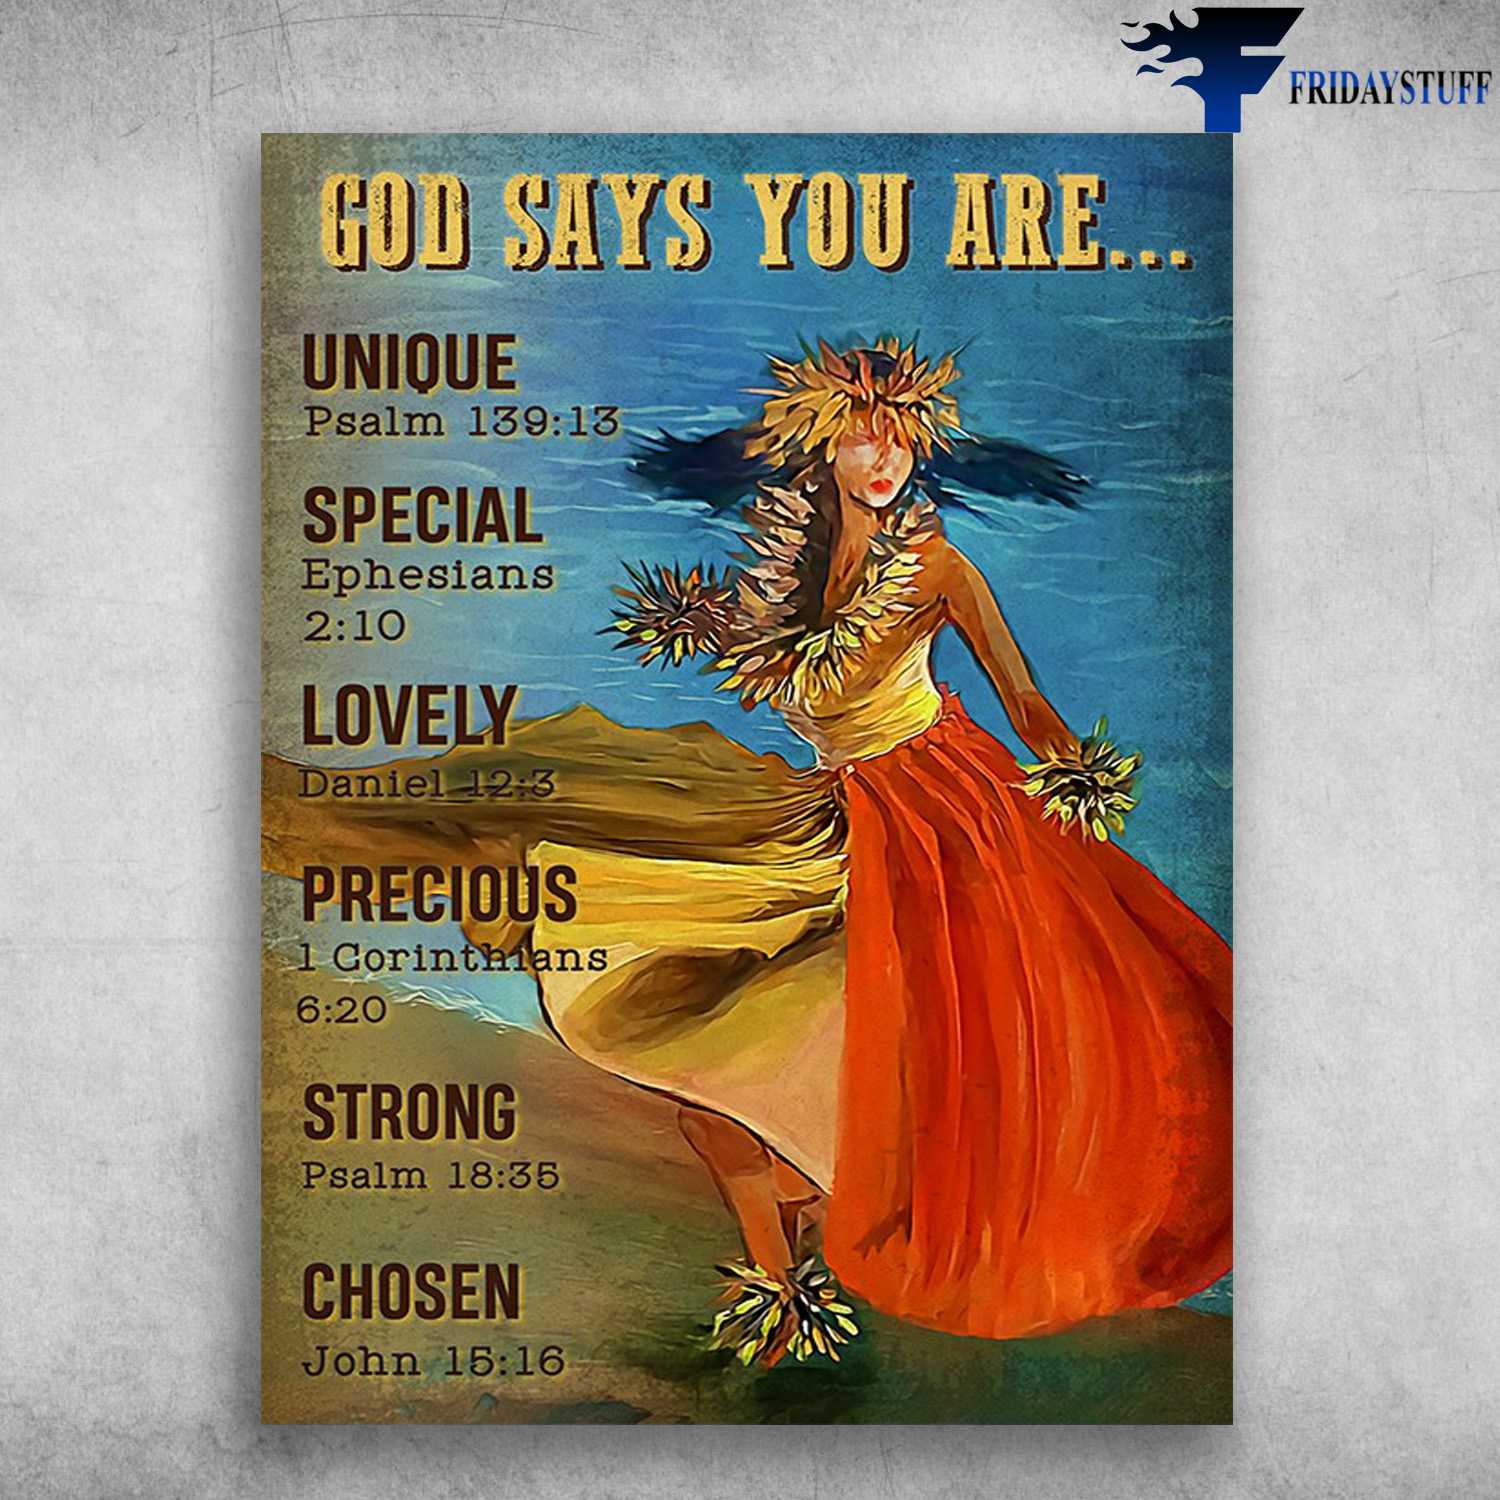 Dancing Girl - God Says You Are, Unique, Special, Lovely, Precious, Strong, Chosen